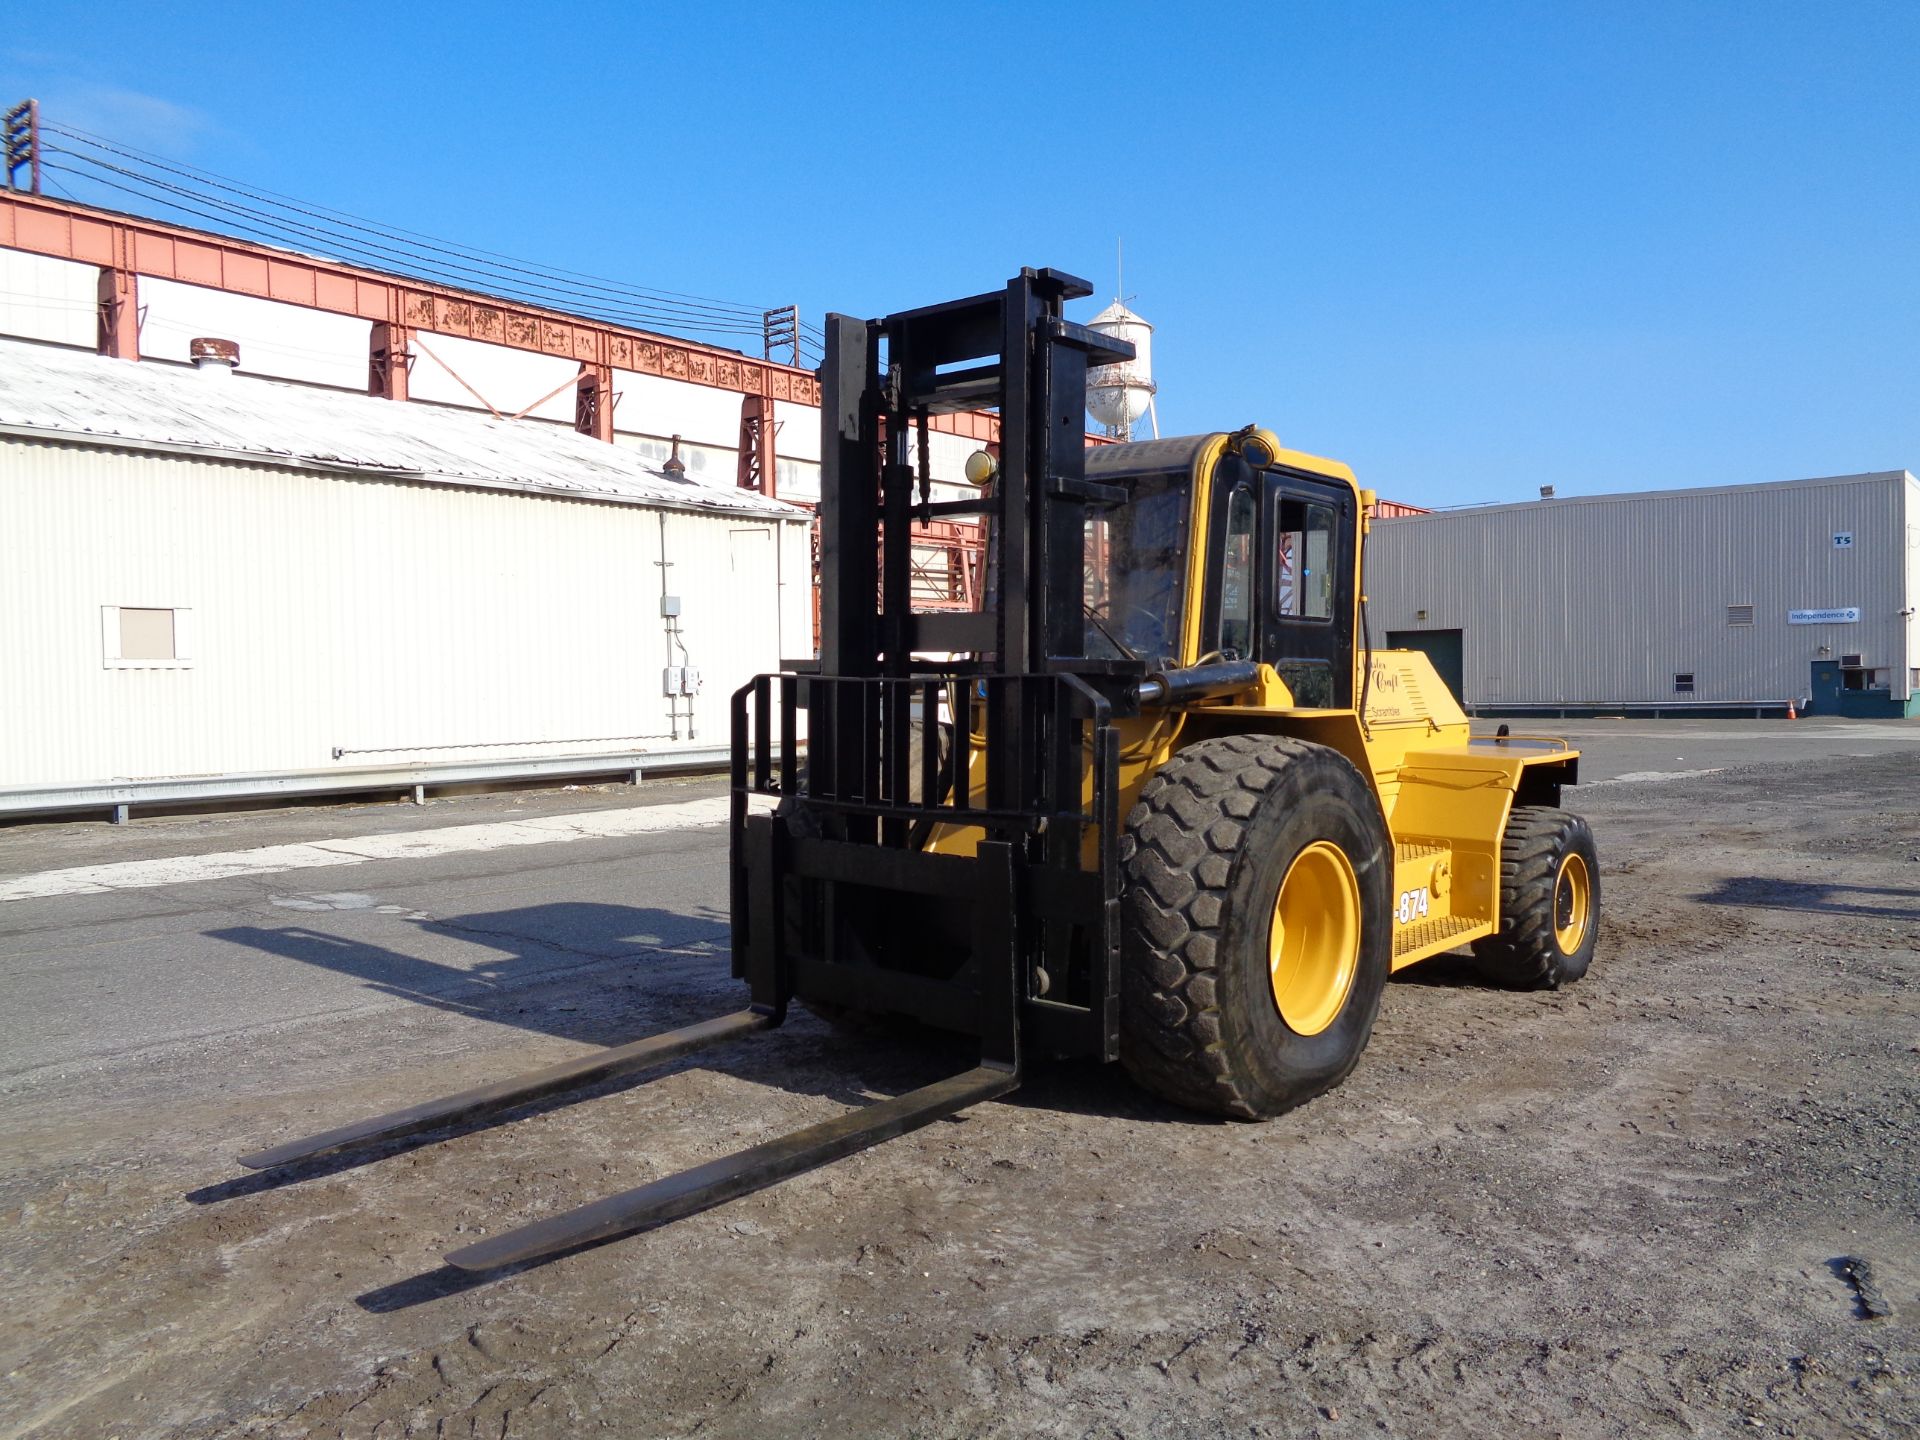 2008 Master Craft C16.874 16,000 lbs Rough Terrain 4x4 Forklift - Image 7 of 12